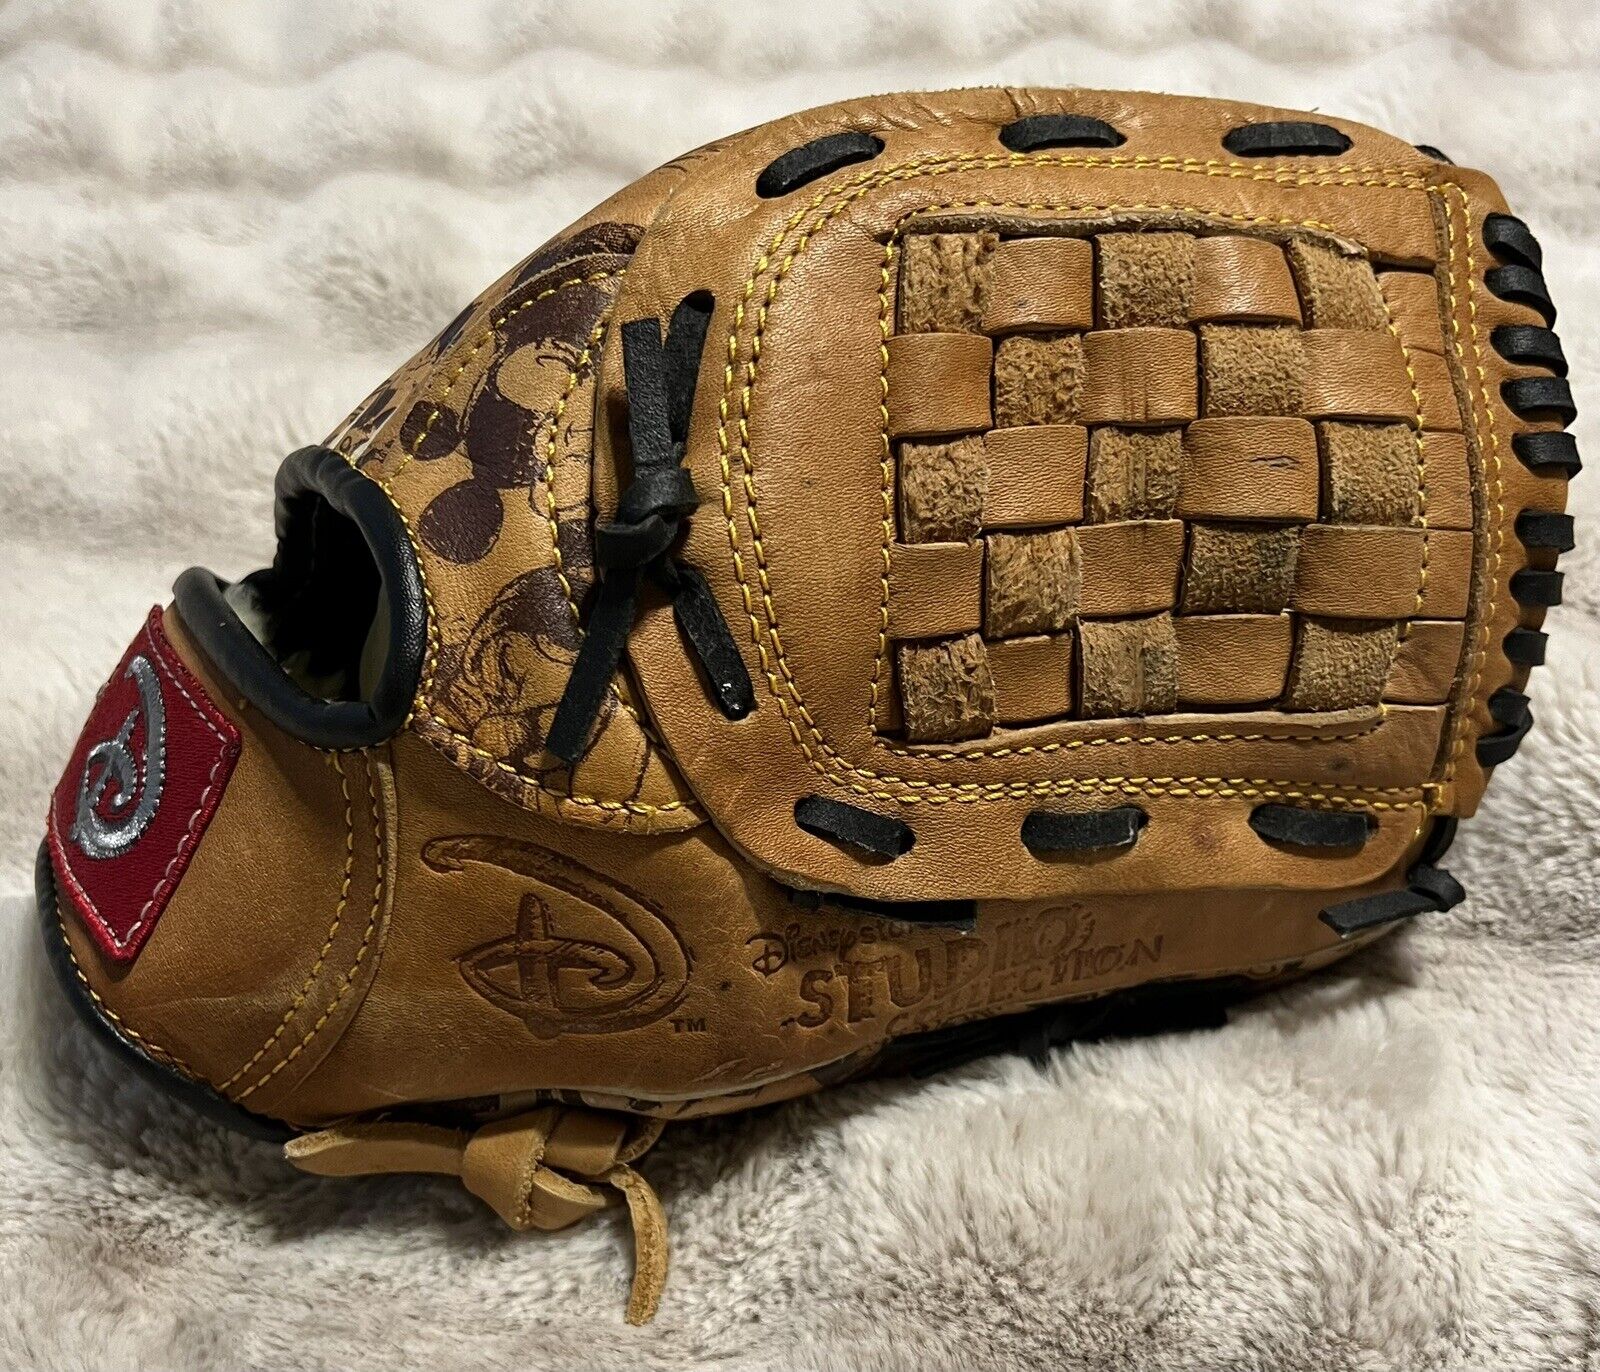 LEATHER FIELDERS RHT BASEBALL GLOVE DISNEY STORE STUDIO COLLECTION MICKEY MOUSE